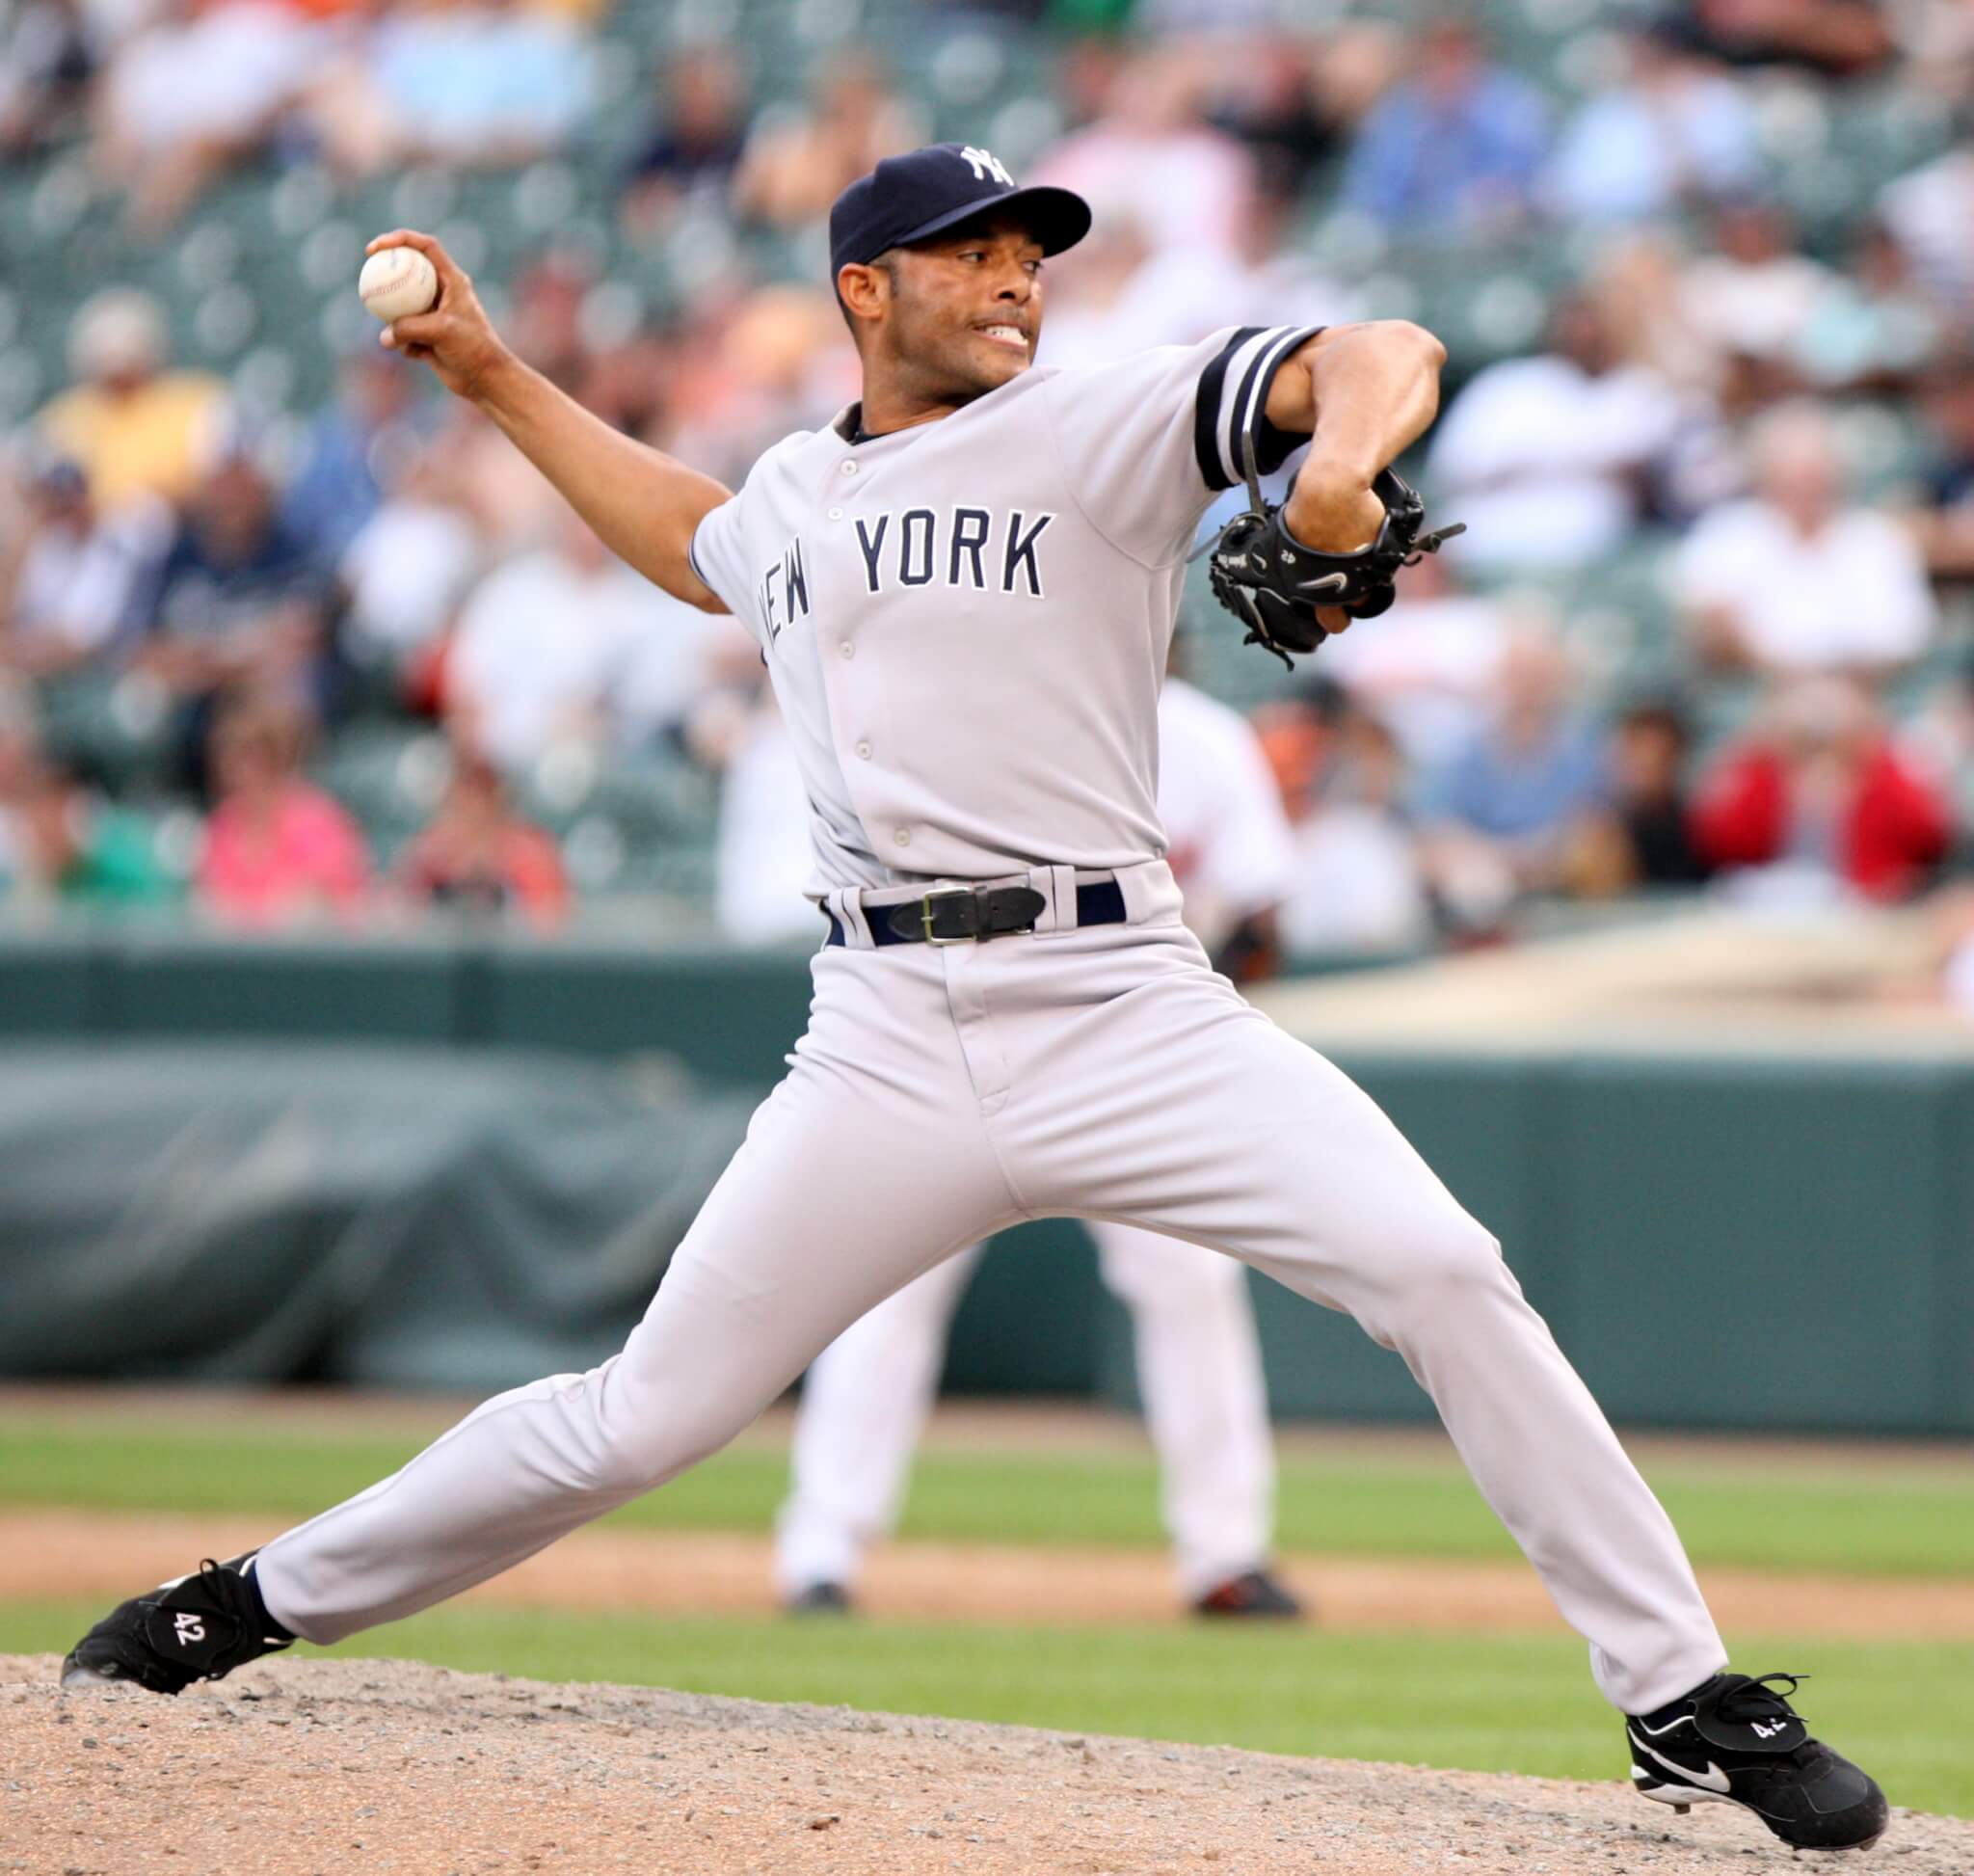 image of Mariano Rivera mid-pitch as one of the best MLB closers of all time